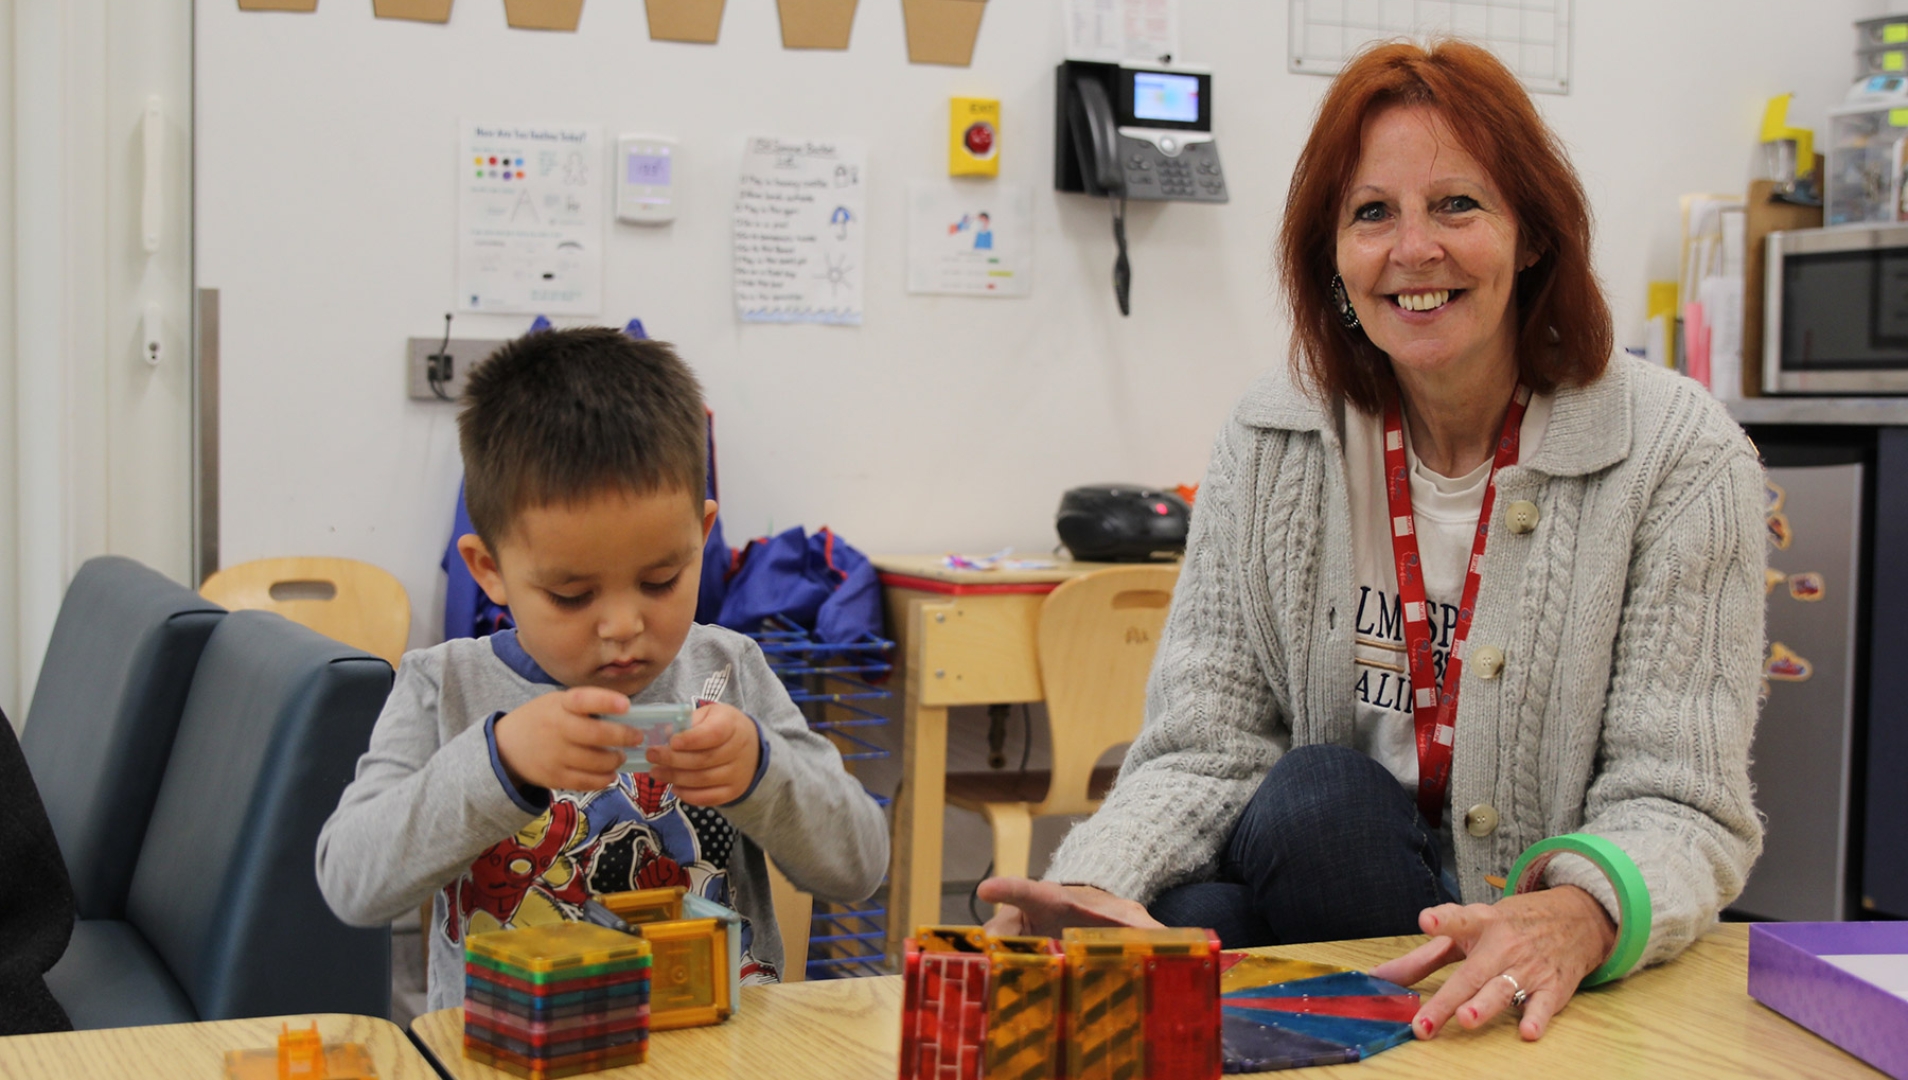 Smiling early childhood educator with shoulder-length red hair sitting next to a young boy playing with magnetic plastic blocks.